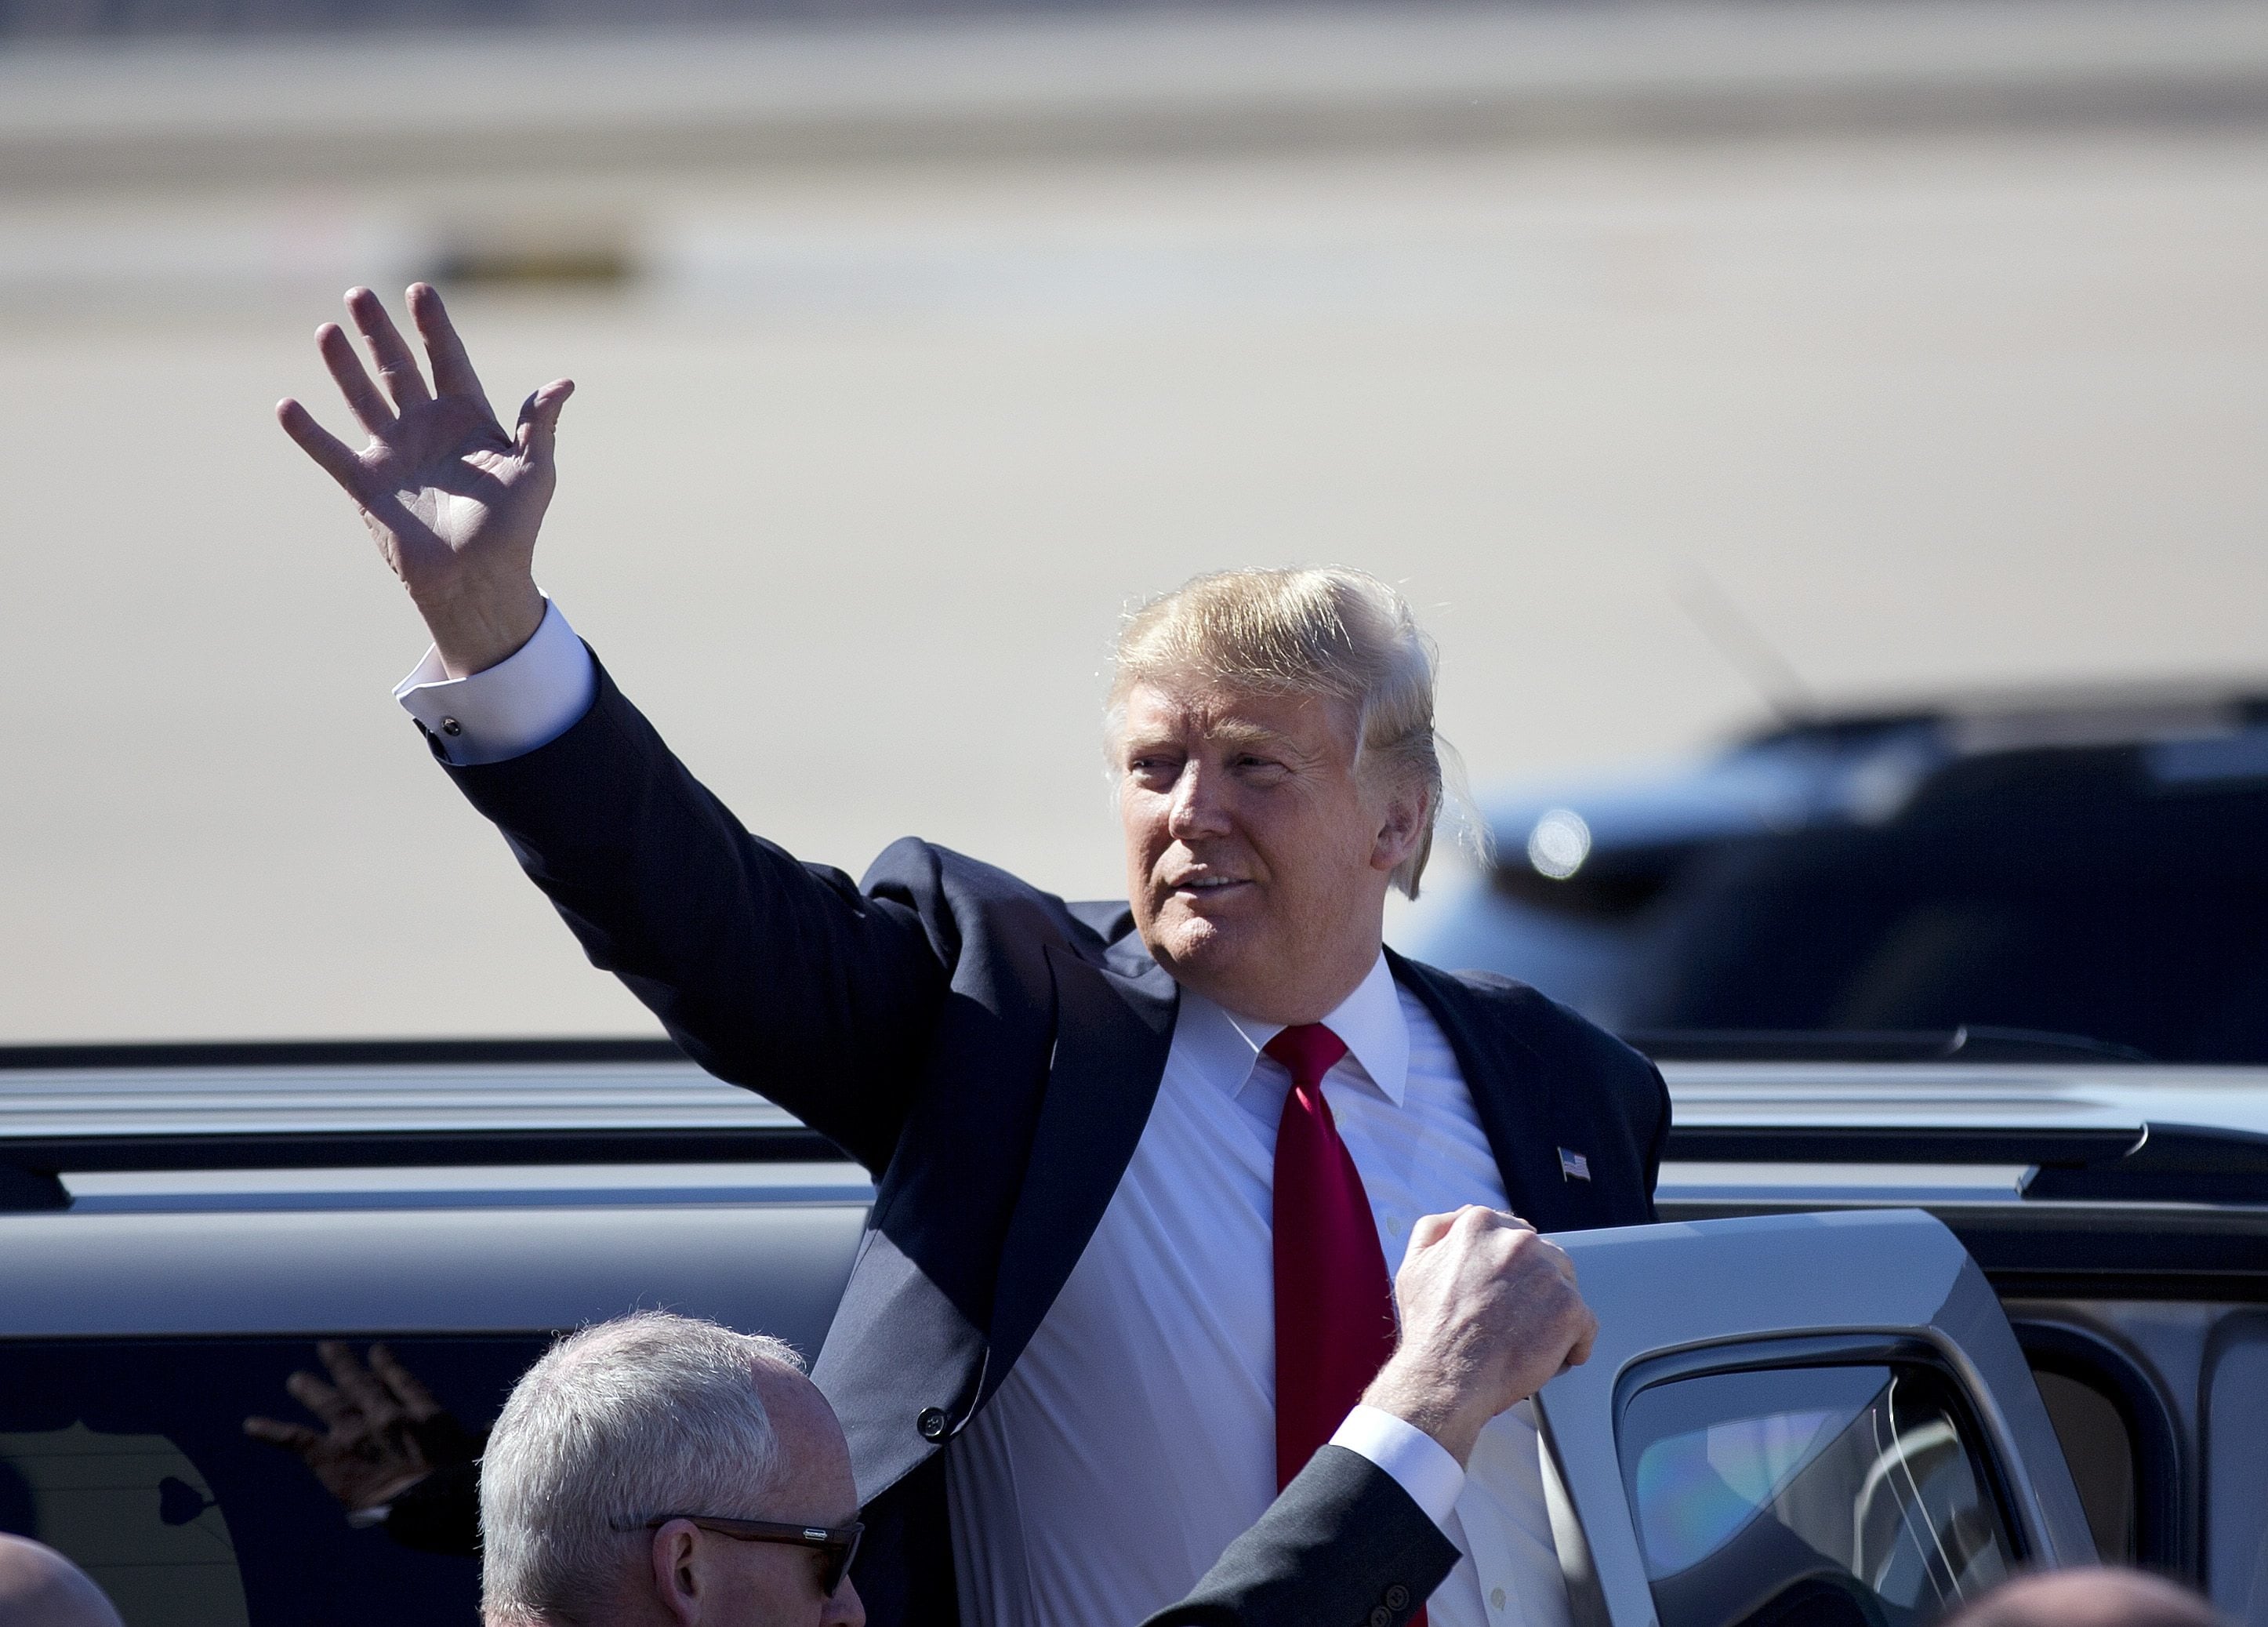 Republican presidential candidate Donald Trump waves as he leaves a rally Saturday in Bentonville, Ark.